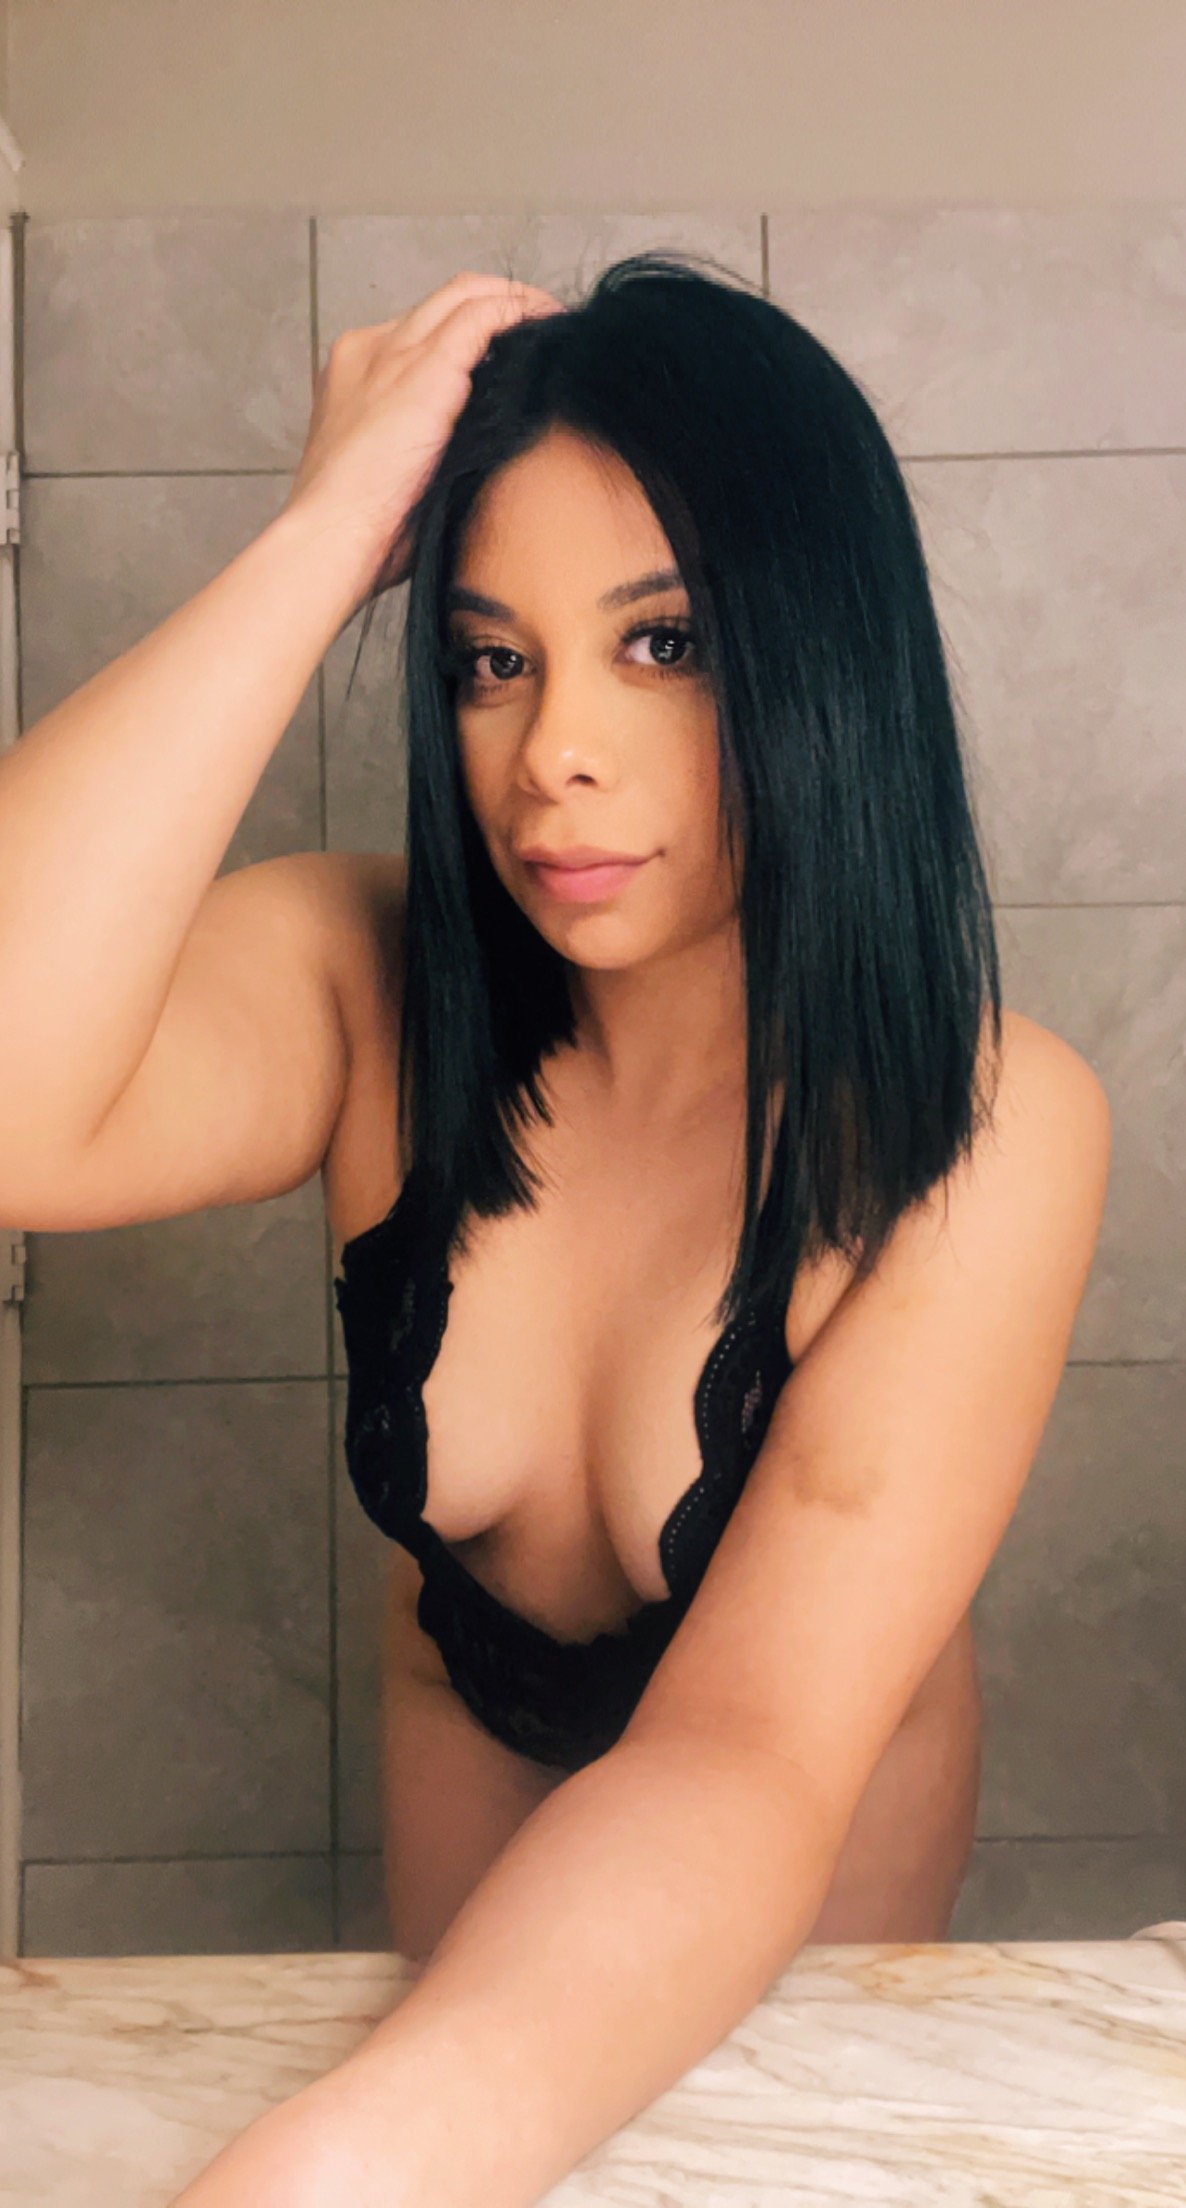 ✨AMY✨ 281-864-0740sensual massage❤️ NEW PICTURES140$YOU CAN MASSAGE ME?4hands promotion! Profile, Escort in Houston, 2818640740